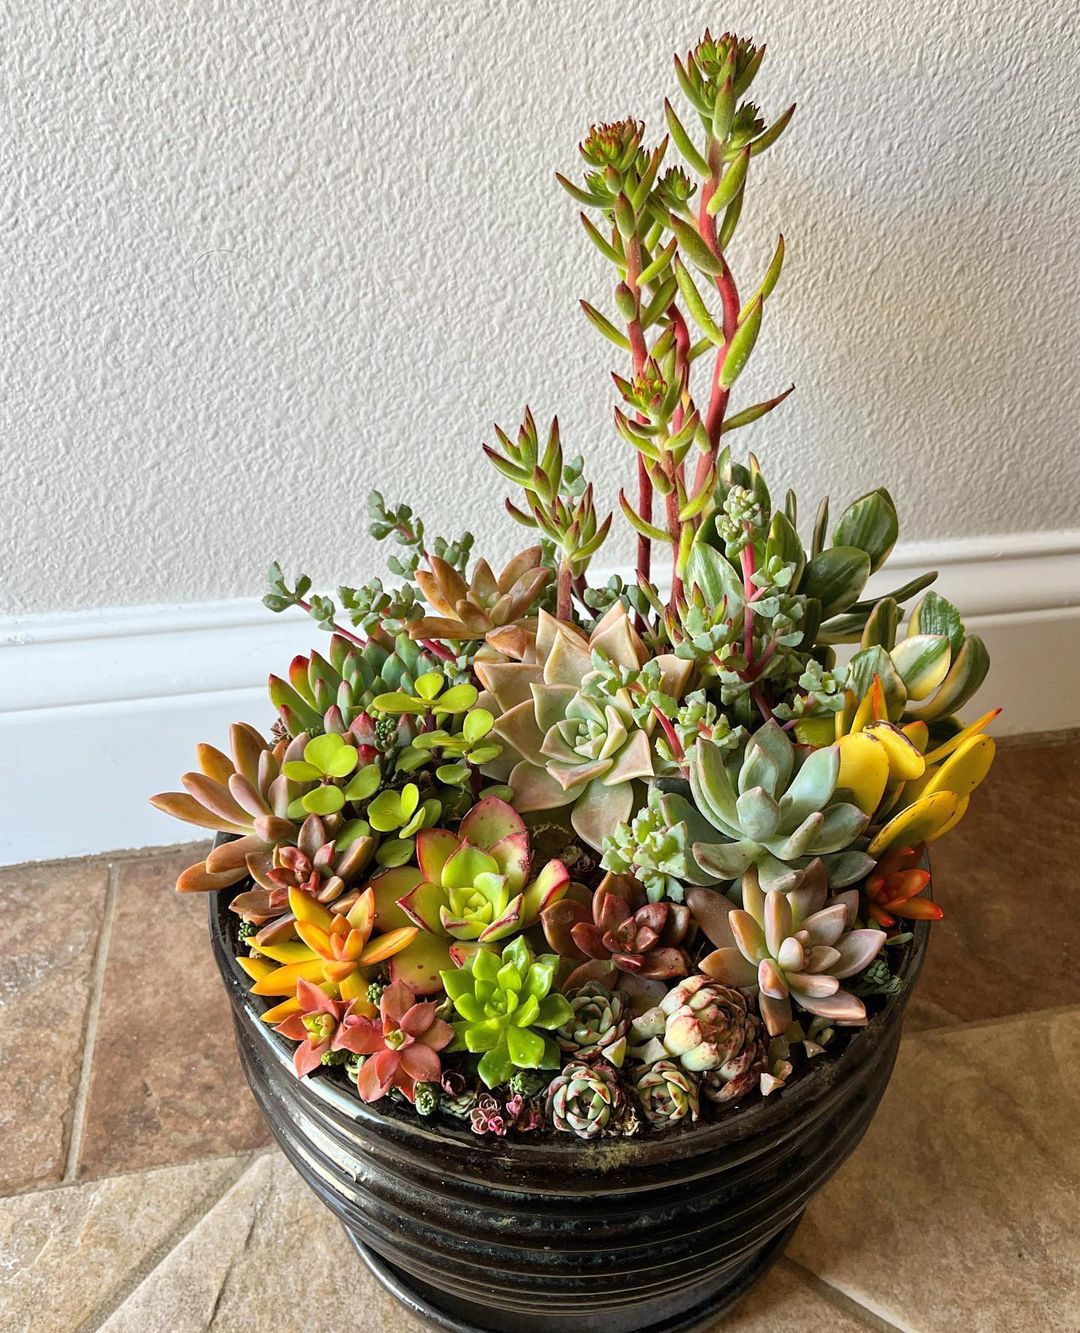 Discover The Magic Of Mini Succulents For Your Home!